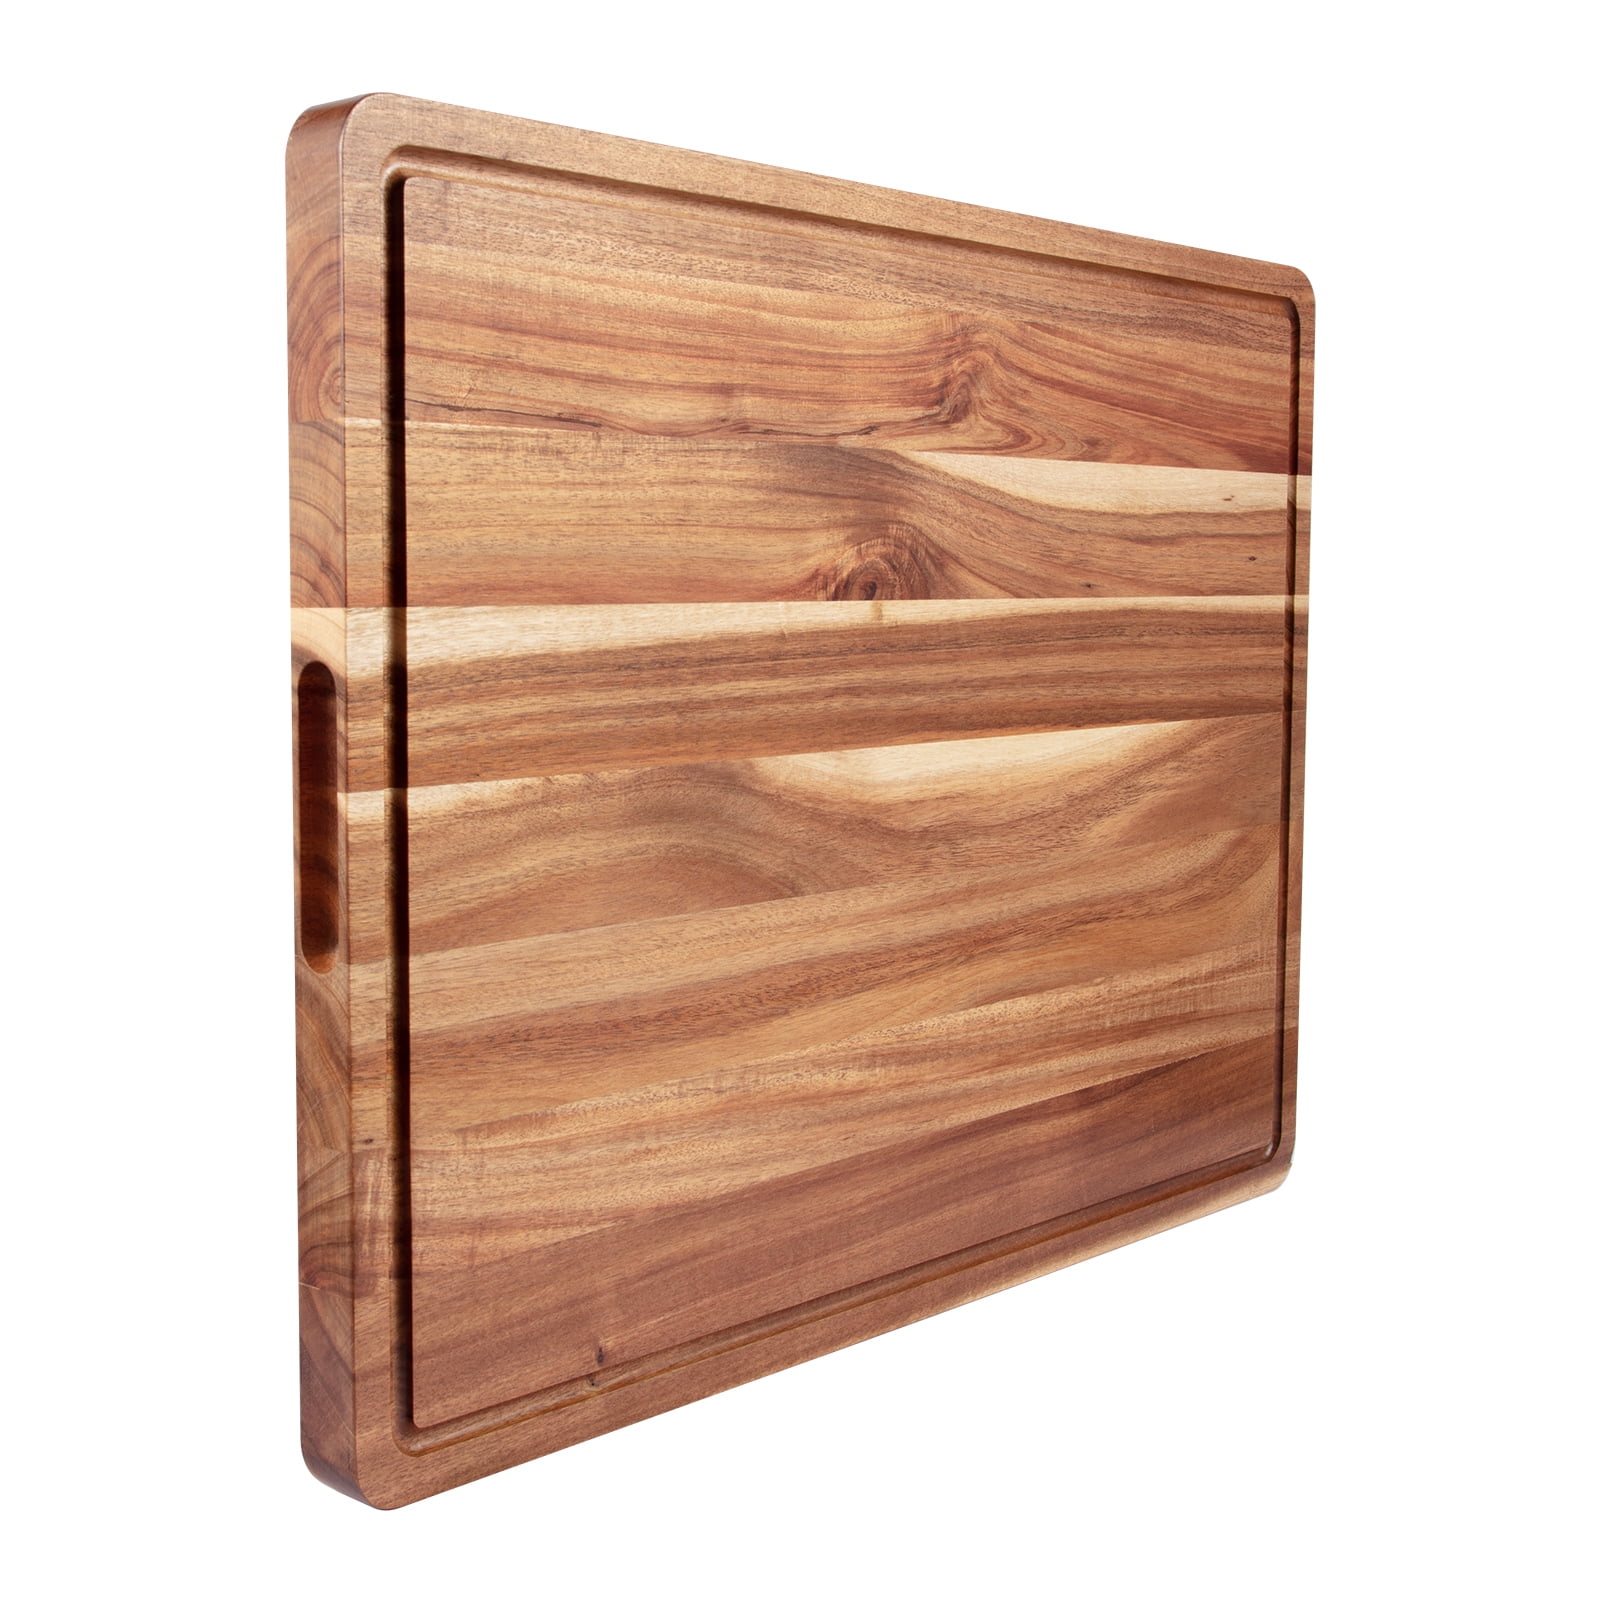 WhizMax Extra Large Wood Cutting Board for Kitchen 24 x 18 inch